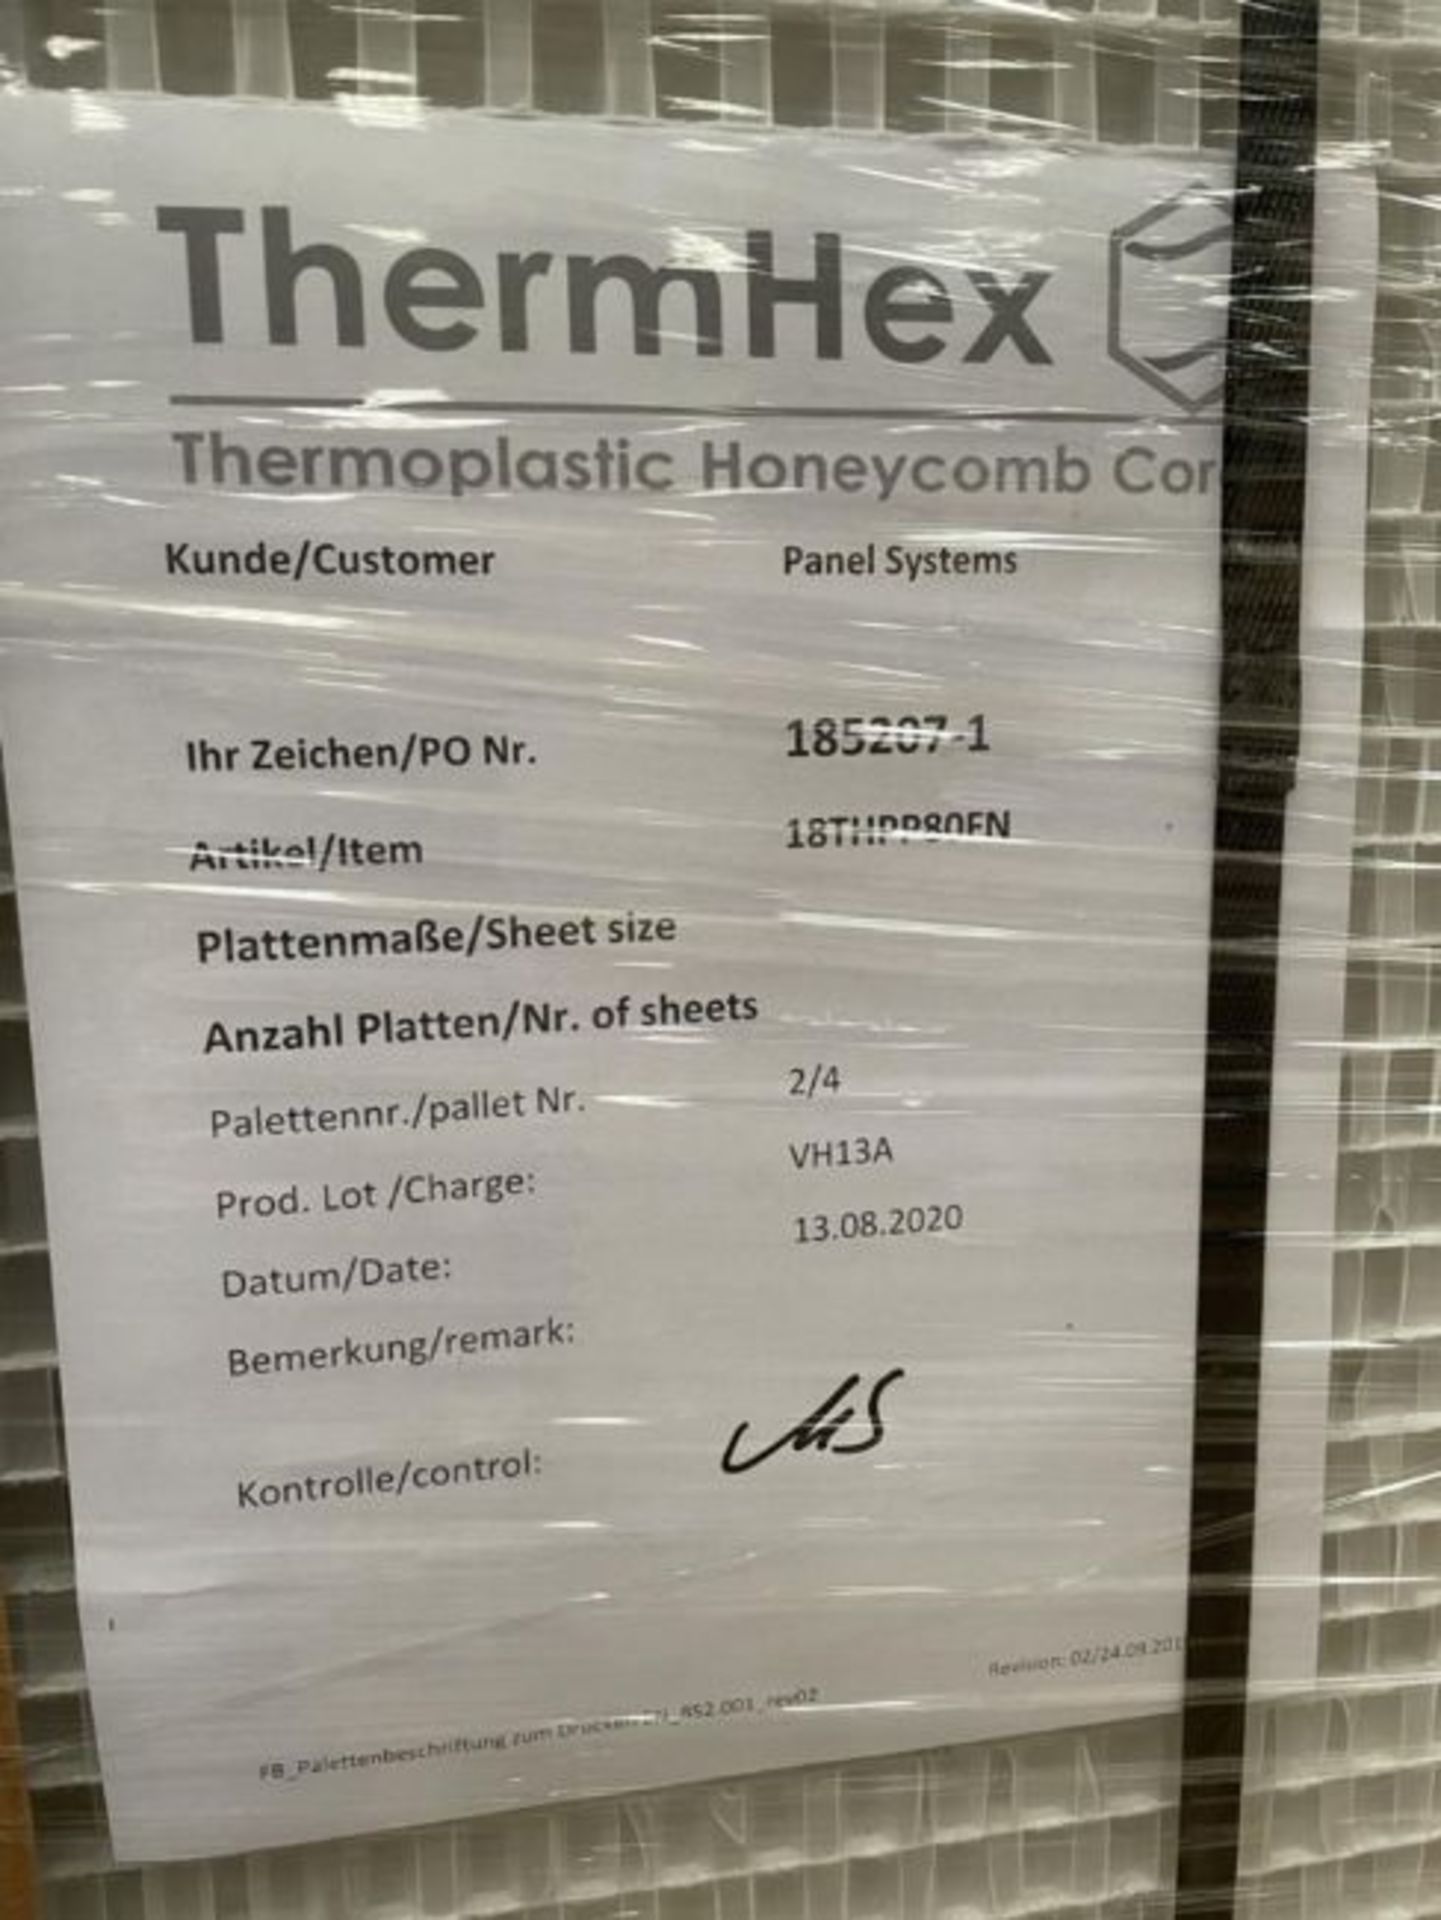 12 x ThermHex Thermoplastic Honeycomb Core Panels - Size 3175 x 1210 x 20mm - New Stock - - Image 9 of 10